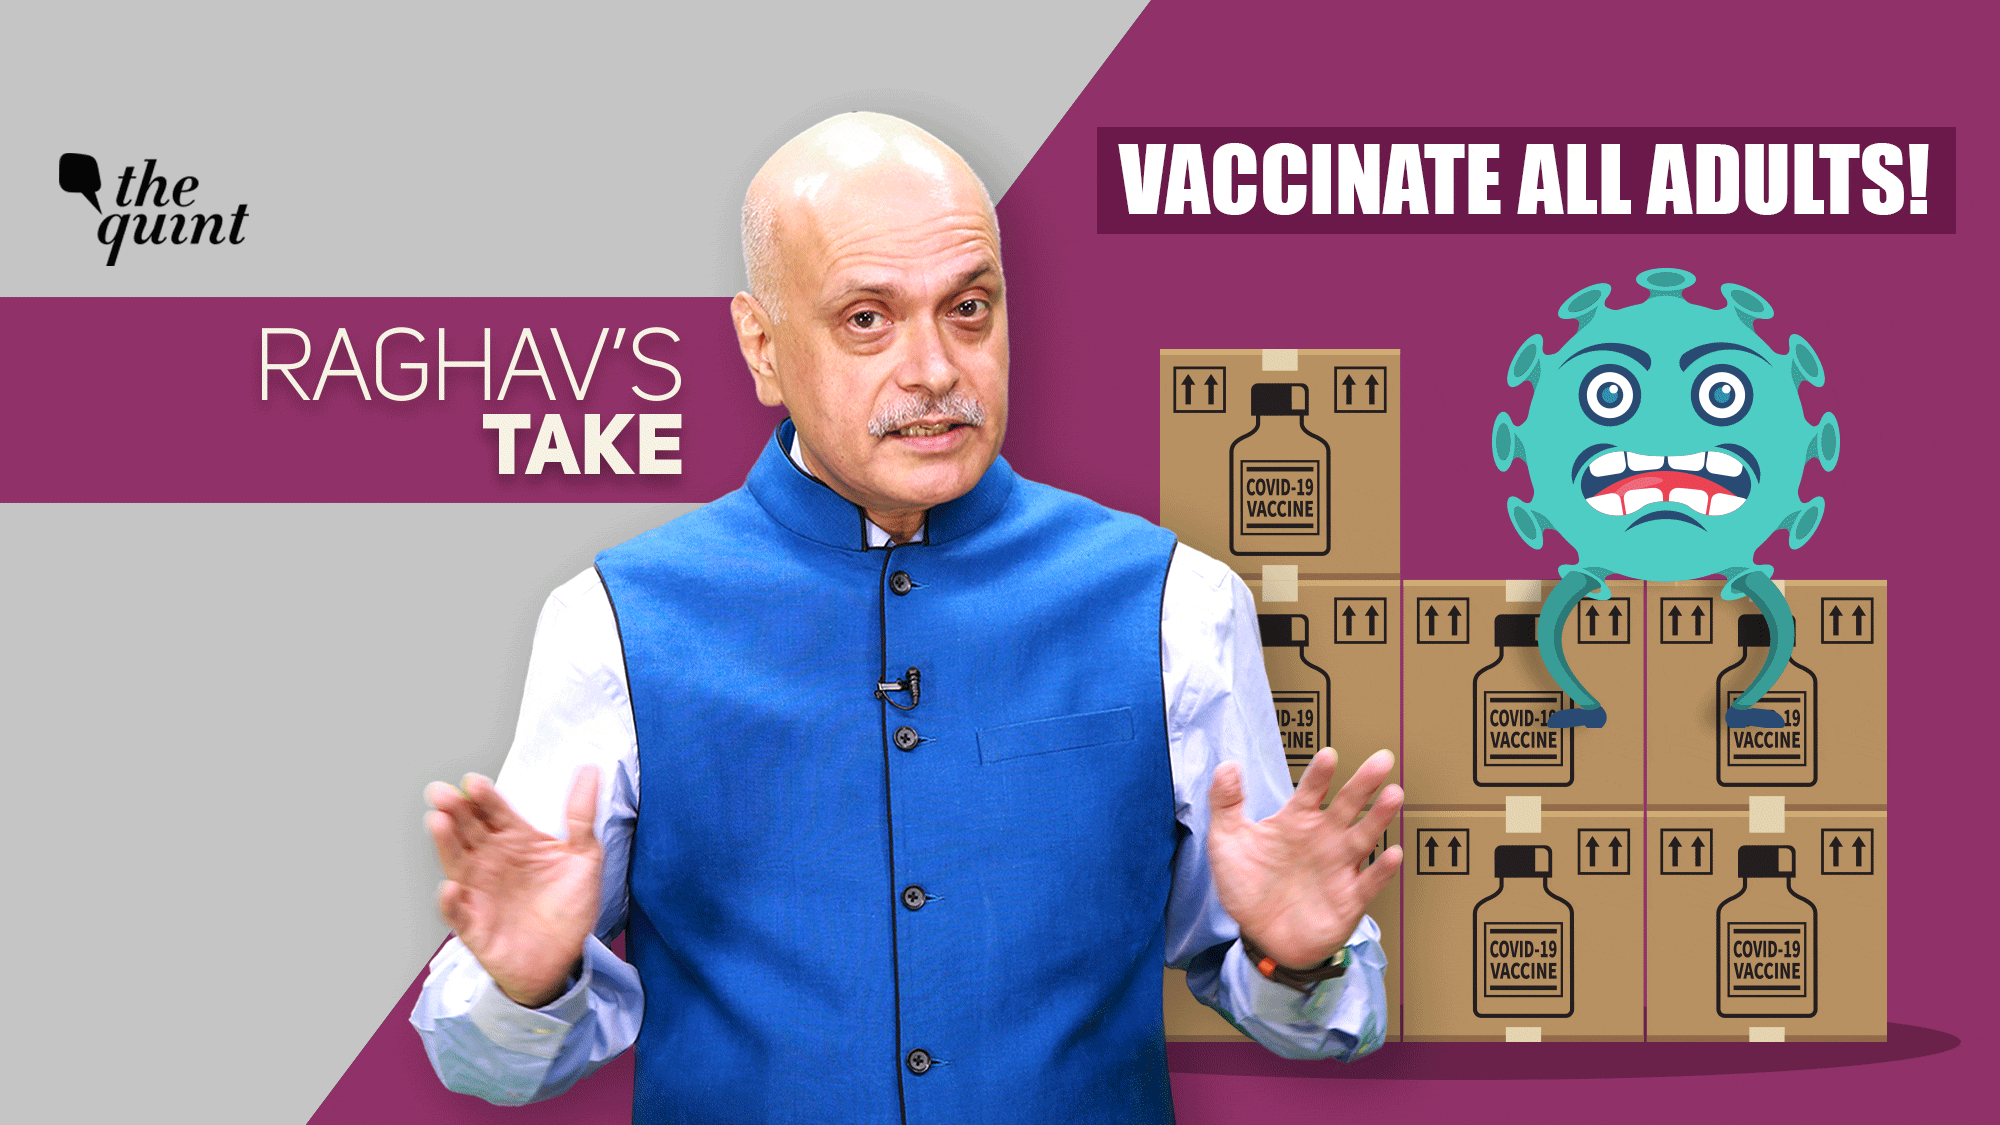 Image of The Quint’s co-founder and Editor-in-Chief Raghav Bahl used for representational purposes.